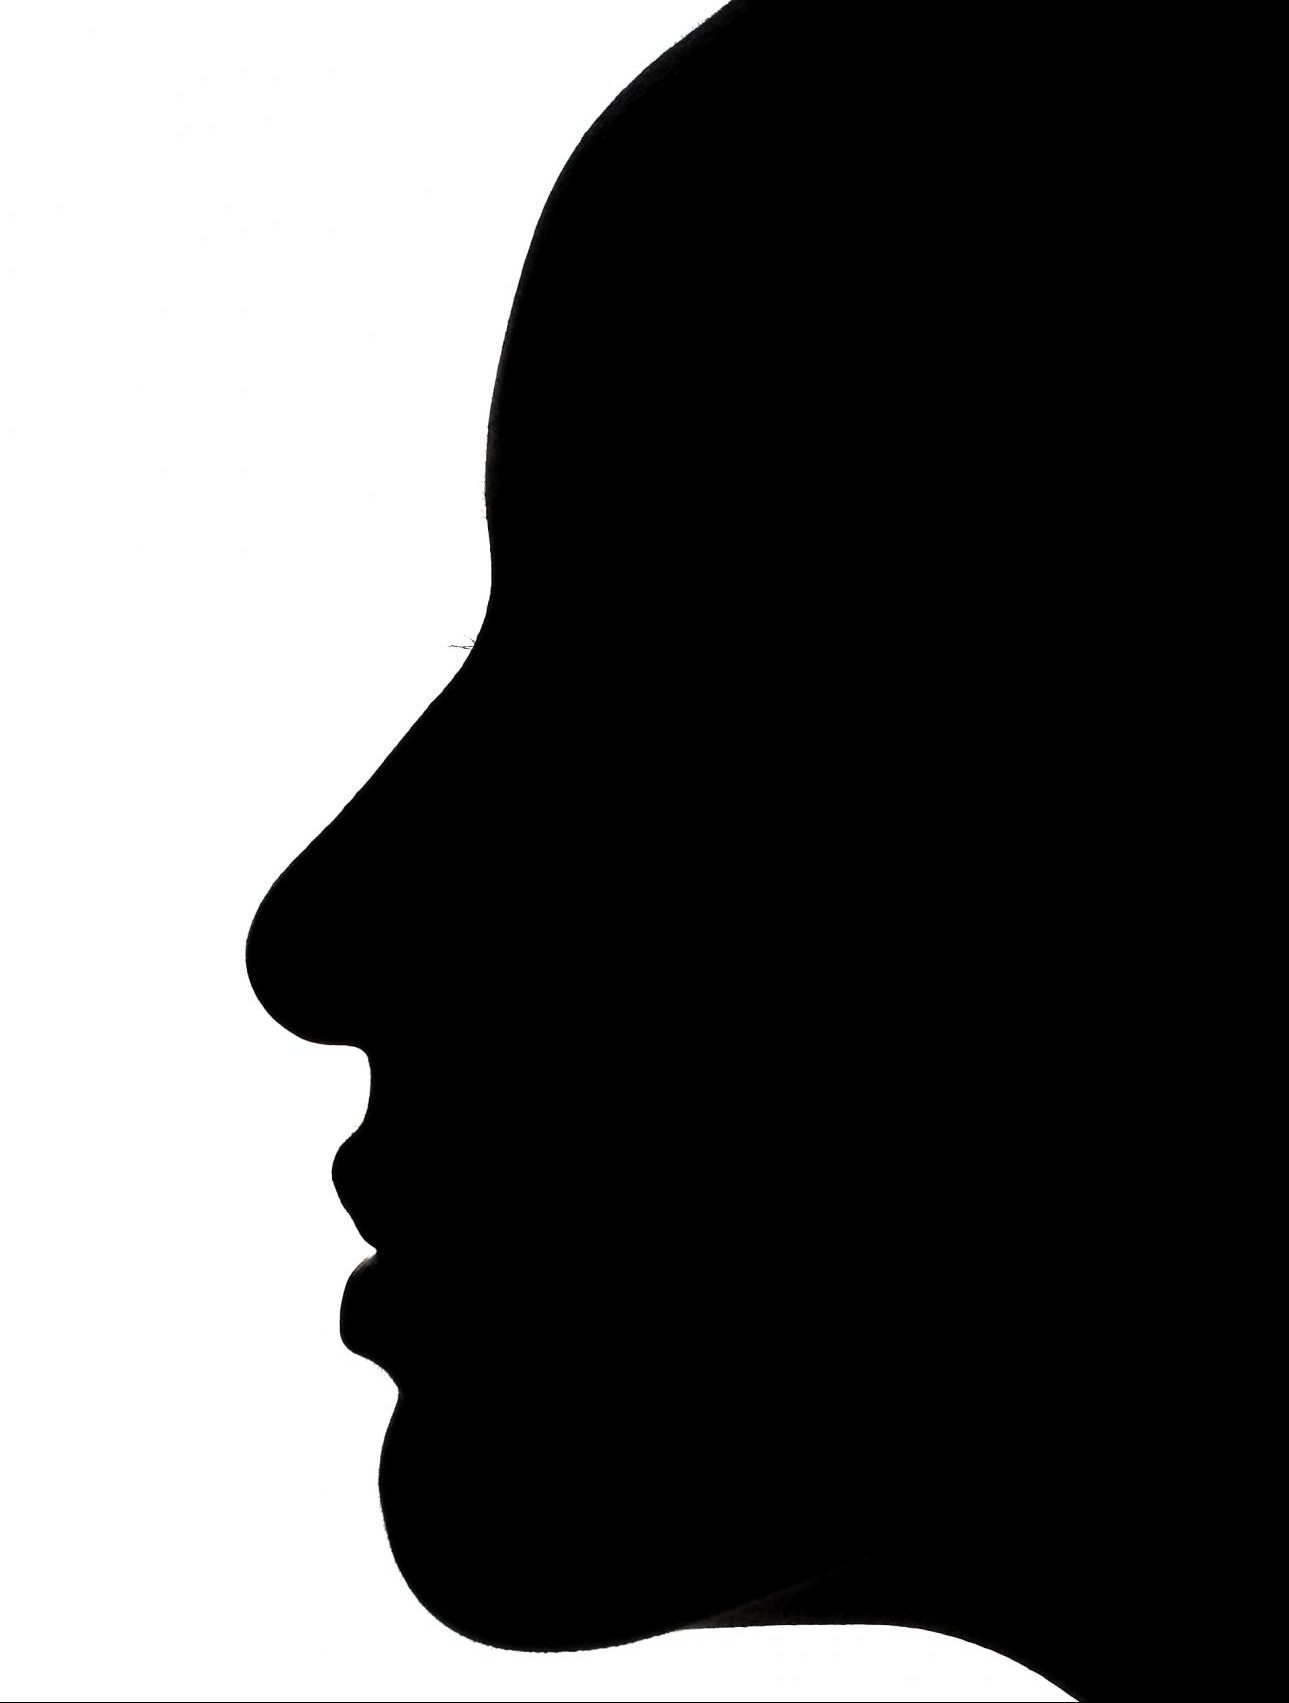 A black silhouette of the side profile of a woman's face against a white background.